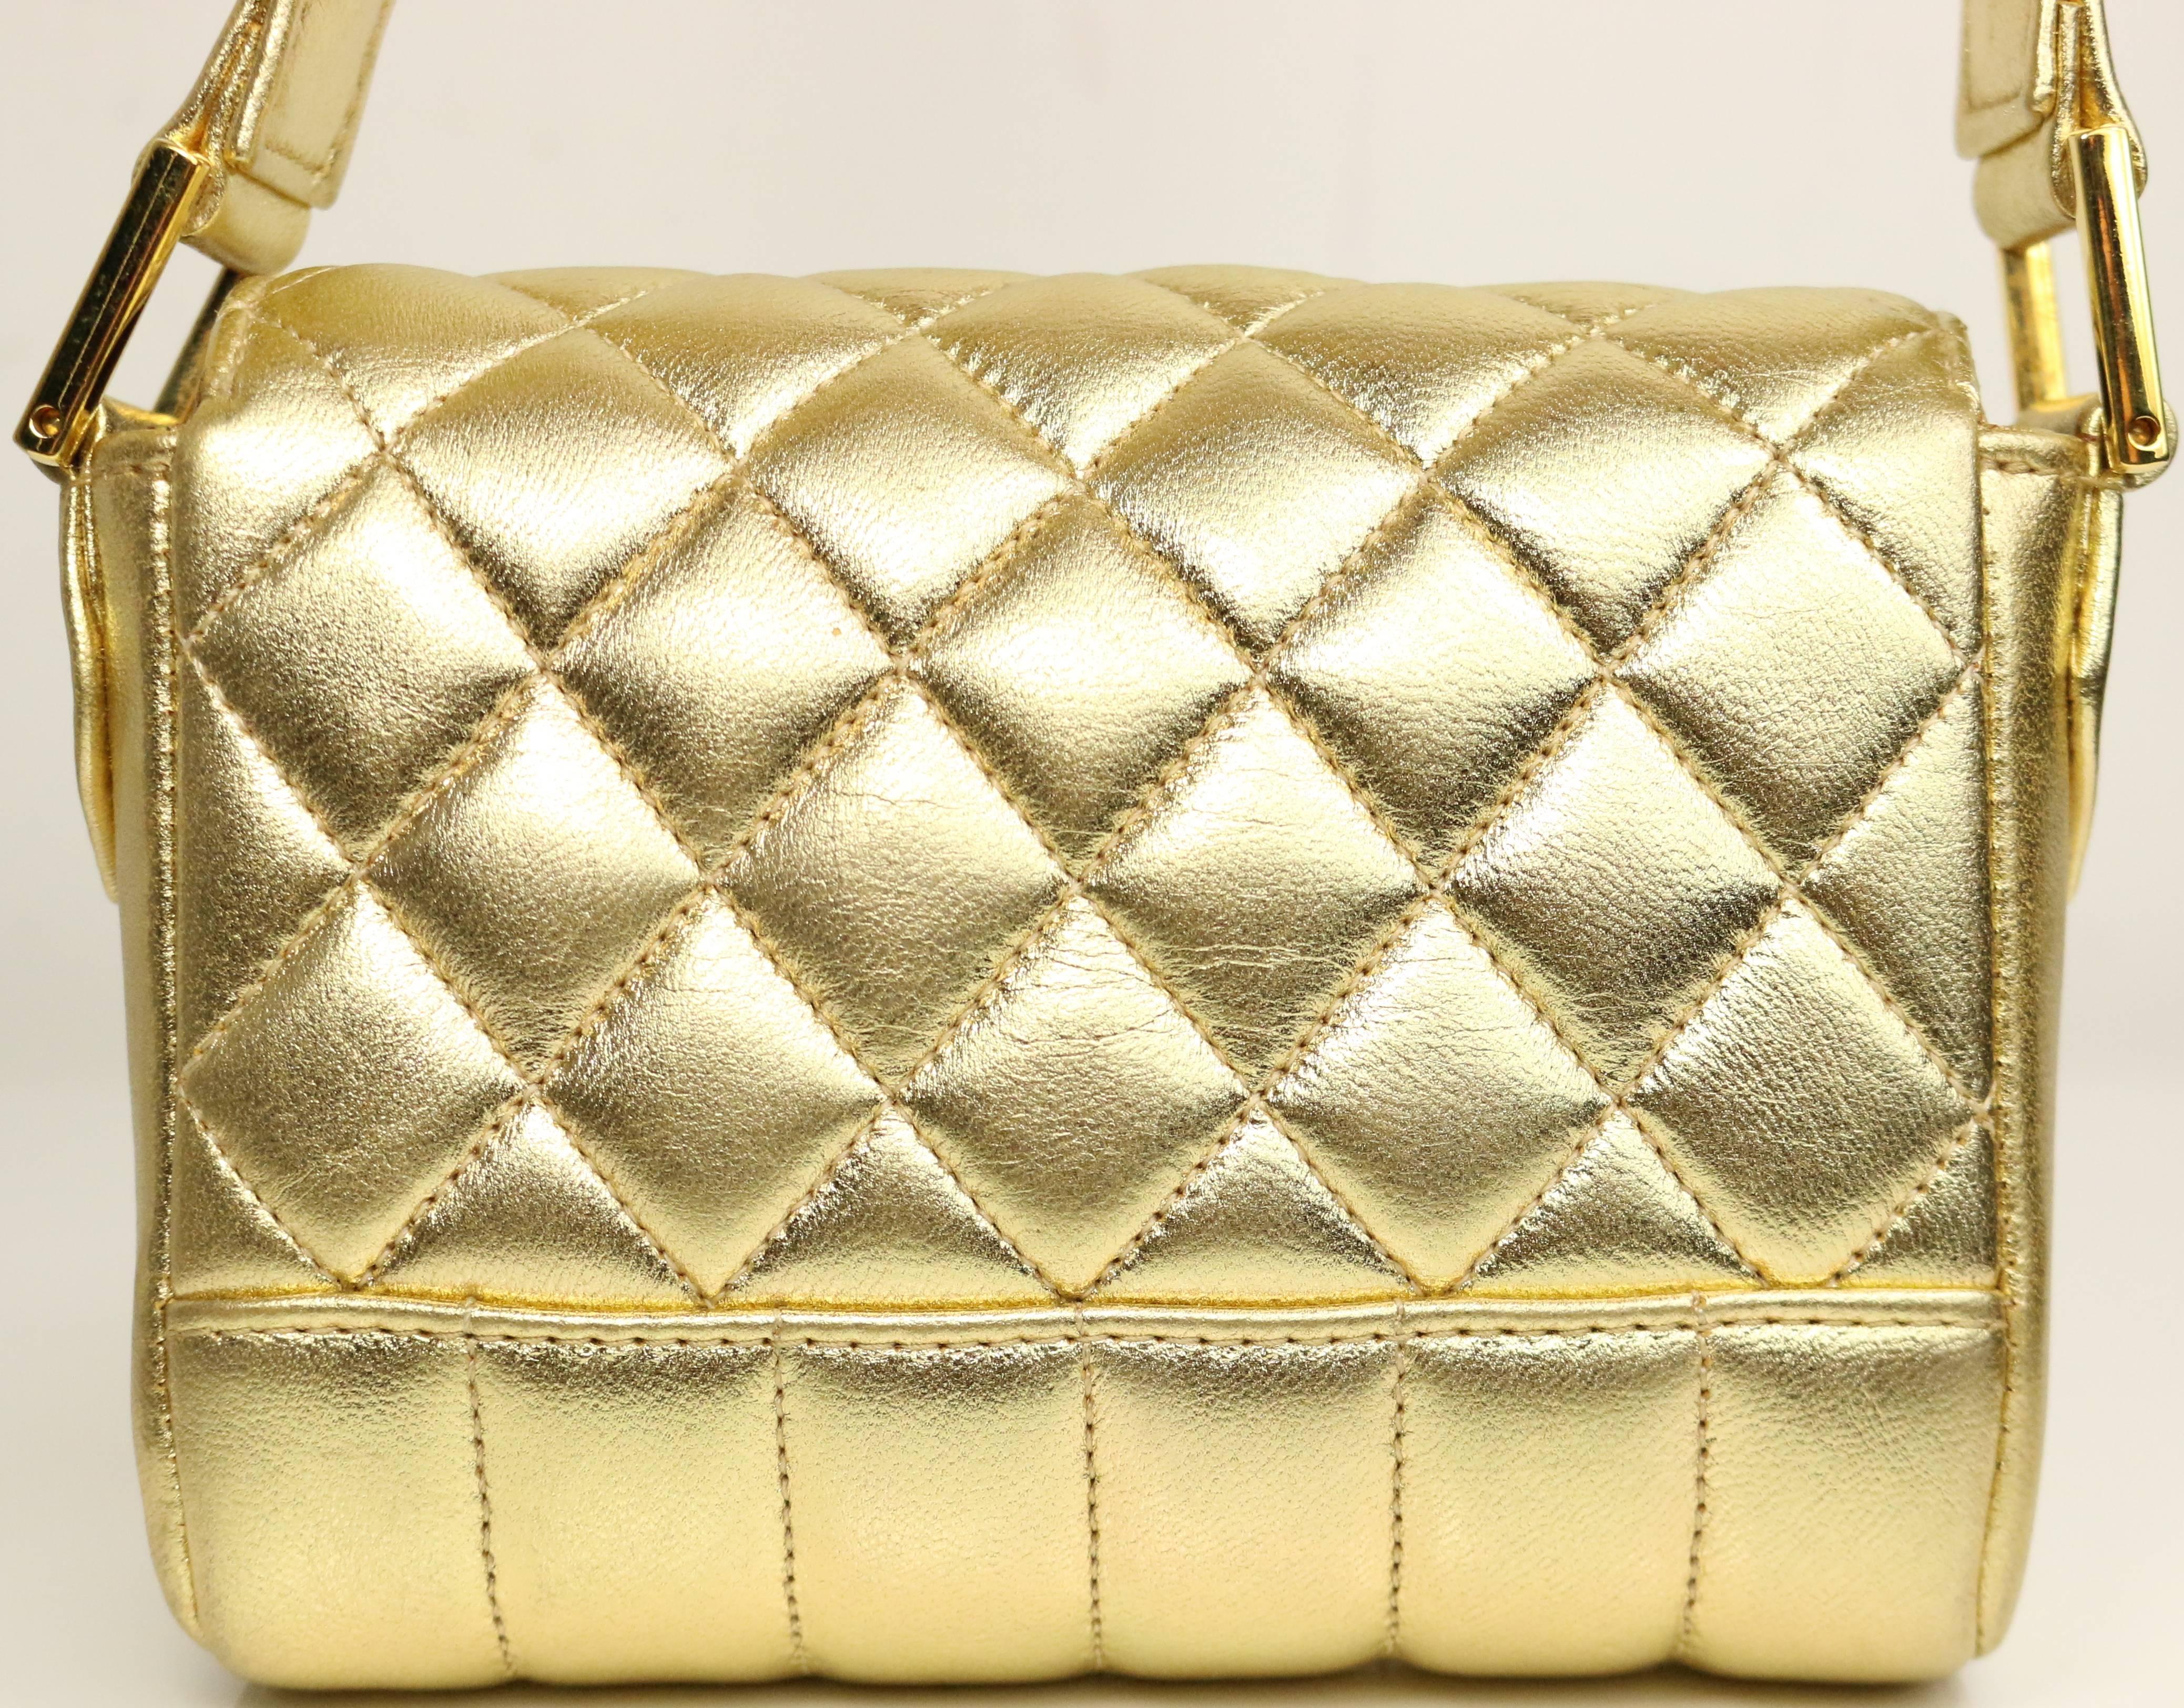 Chanel 13cm Gold Metallic Lambskin Quilted Flap Shoulder/ Hand Bag In Excellent Condition For Sale In Sheung Wan, HK